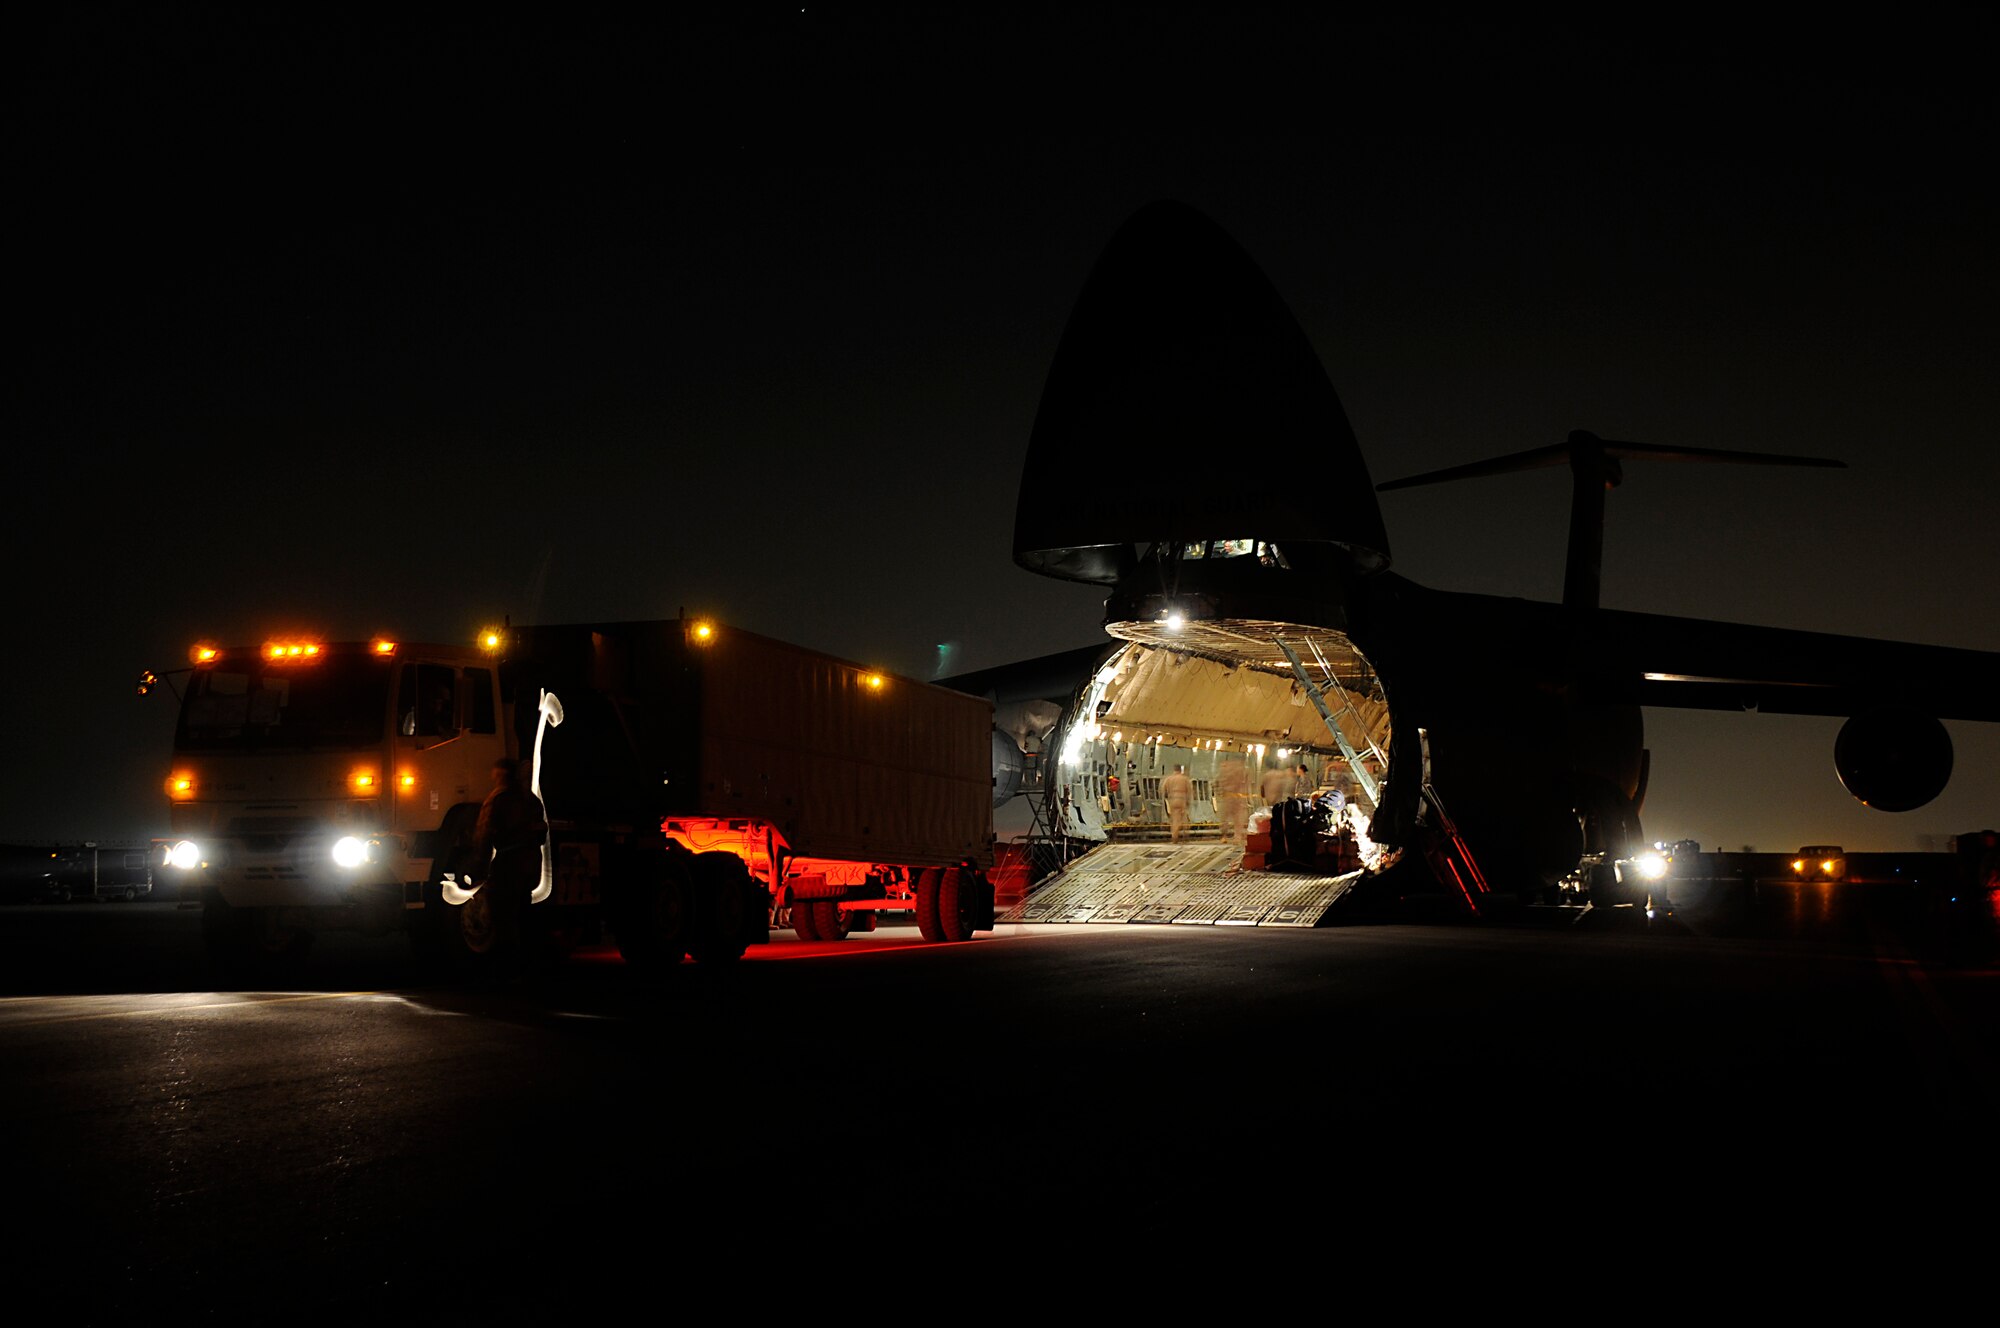 SOUTHWEST ASIA - Vehicles and equipment belonging to the 5-52 Air Defense Artillery Battalion are unloaded from a C-5 Galaxy, Mar 6. The Army comes to the 380th Air Expeditionary Wing bringing with them the first Patriot Battery to the wing, improving air defense capability. The Army will be incorporated into the 380th AEW's mission in support of Operations Iraqi and Enduring Freedom and Joint Task Force Horn of Africa. The 5-52 Air Defense Artillery Battalion is deployed out of Fort Bliss, TX. (U.S. Air Force photo by Senior Airman Brian J. Ellis) (Released)